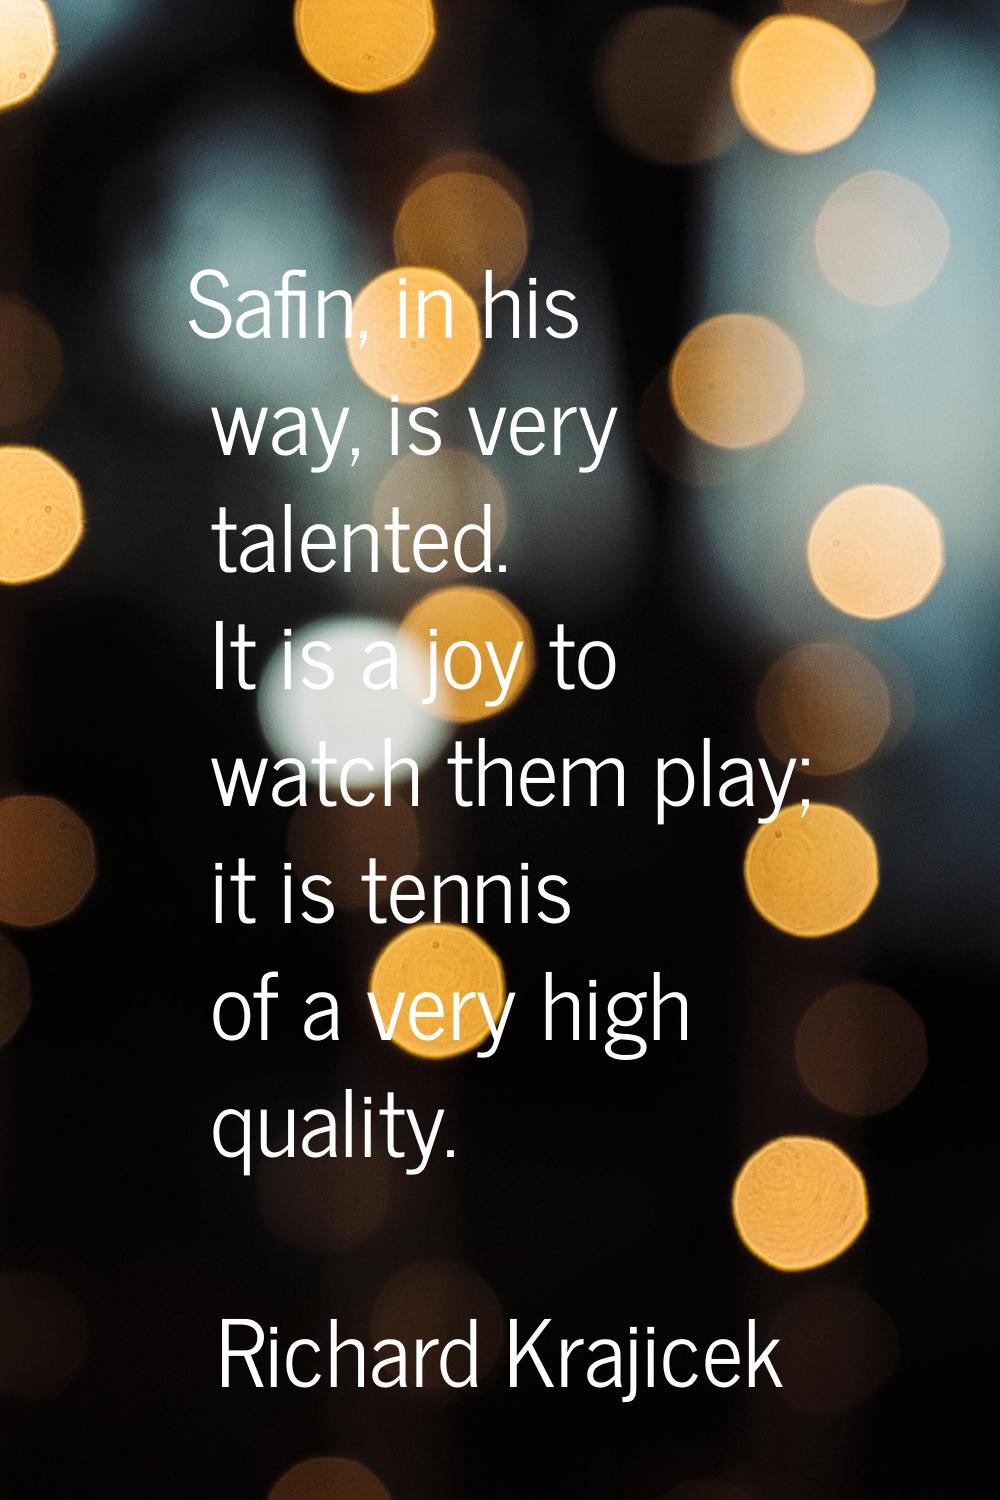 Safin, in his way, is very talented. It is a joy to watch them play; it is tennis of a very high qu